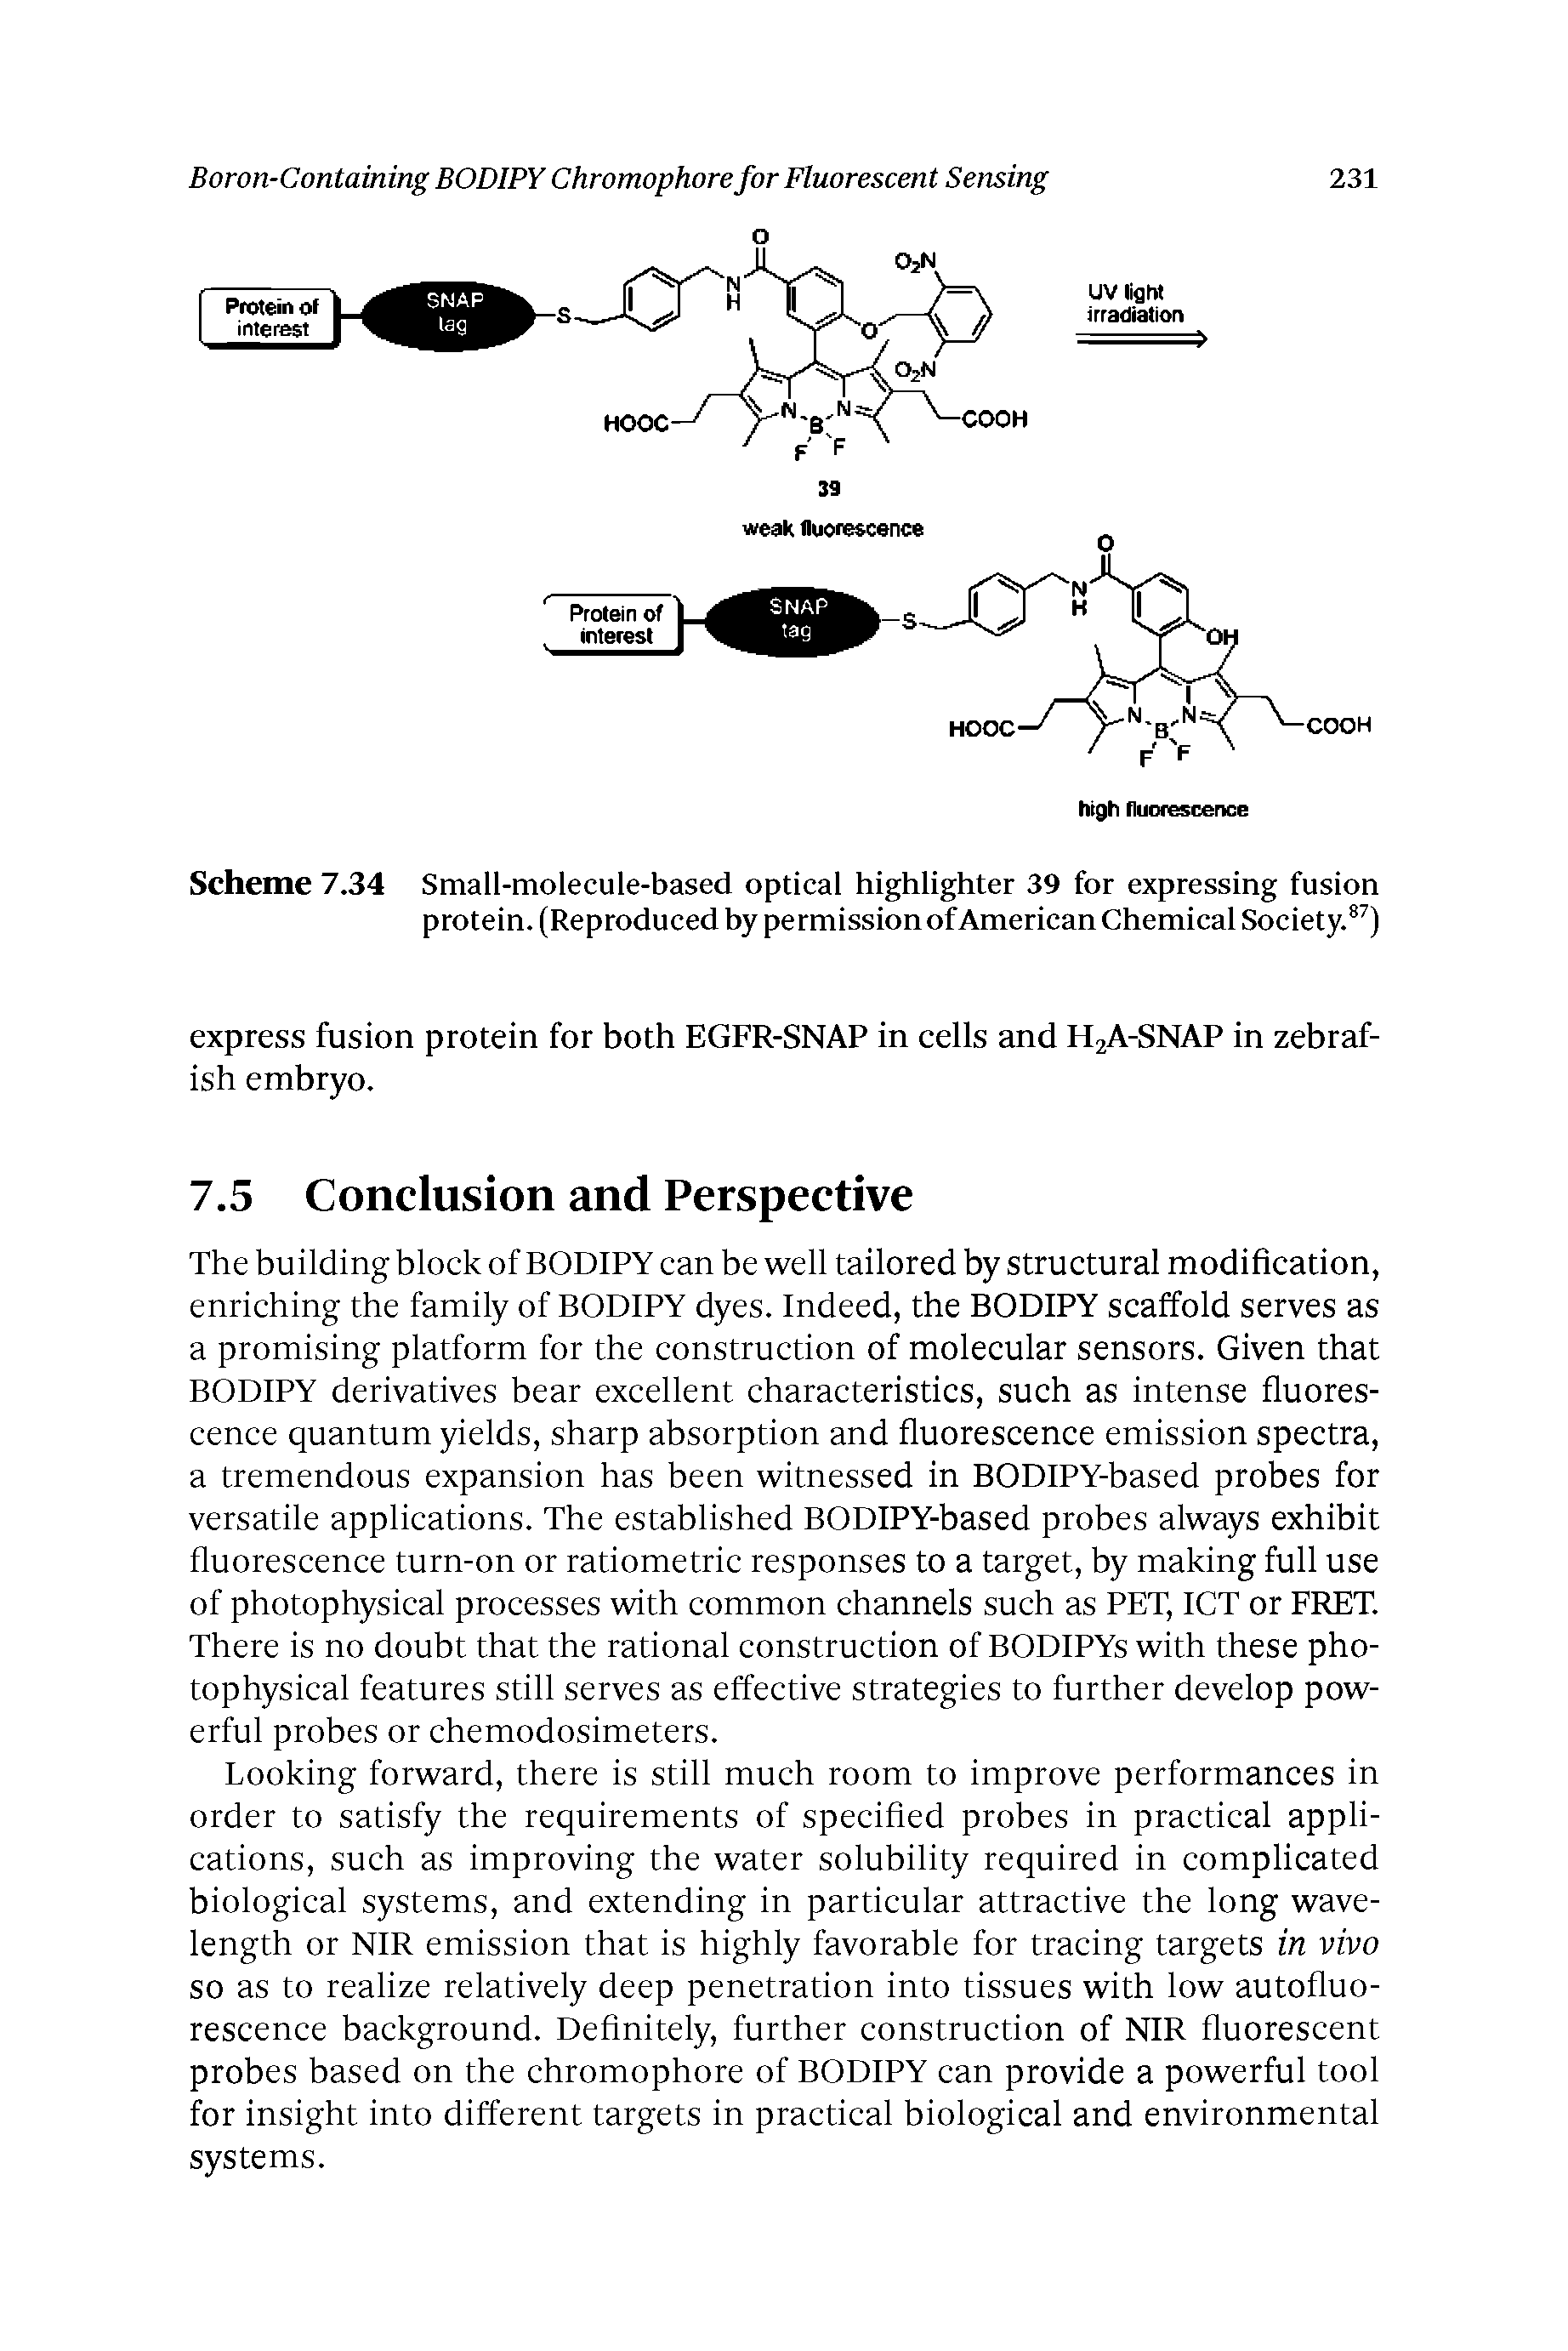 Scheme 7.34 Small-molecule-based optical highlighter 39 for expressing fusion protein. (Reproduced by permission of American Chemical Society.